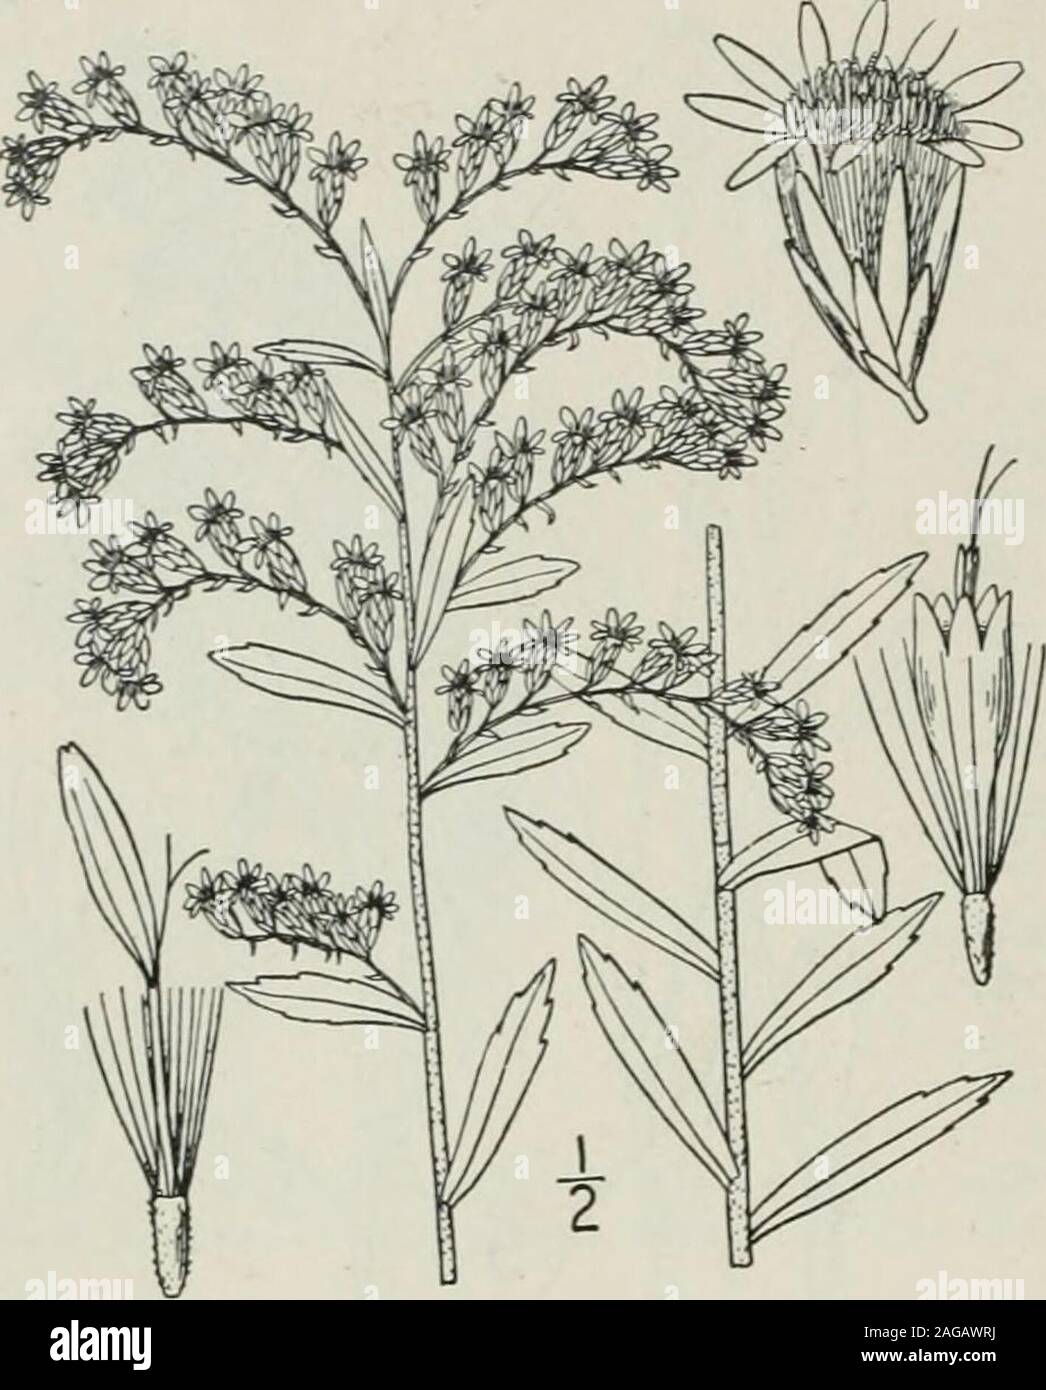 . An illustrated flora of the northern United States, Canada and the British possessions : from Newfoundland to the parallel of the southern boundary of Virginia and from the Atlantic Ocean westward to the 102nd meridian. 390 COMPOSITAE. Vol. III.. 25. Solidago tortifolia Ell. Twisted-leafGolden-rod. Fig. 4237. Solidago retrorsa Pursh, Fl. Am. Sept. 539. 1814. Not Michx. 1803.S. tortifolia Ell. Bot. S. C. & Ga. 2: 377. 1824. Stem slender, rough-pubescent or puberulent,2°-2,° high, simple. Leaves linear or linear-oblong, often twisted, scabrous, sessile, acute,1-2 long, iA-3 wide, obscurely vei Stock Photo